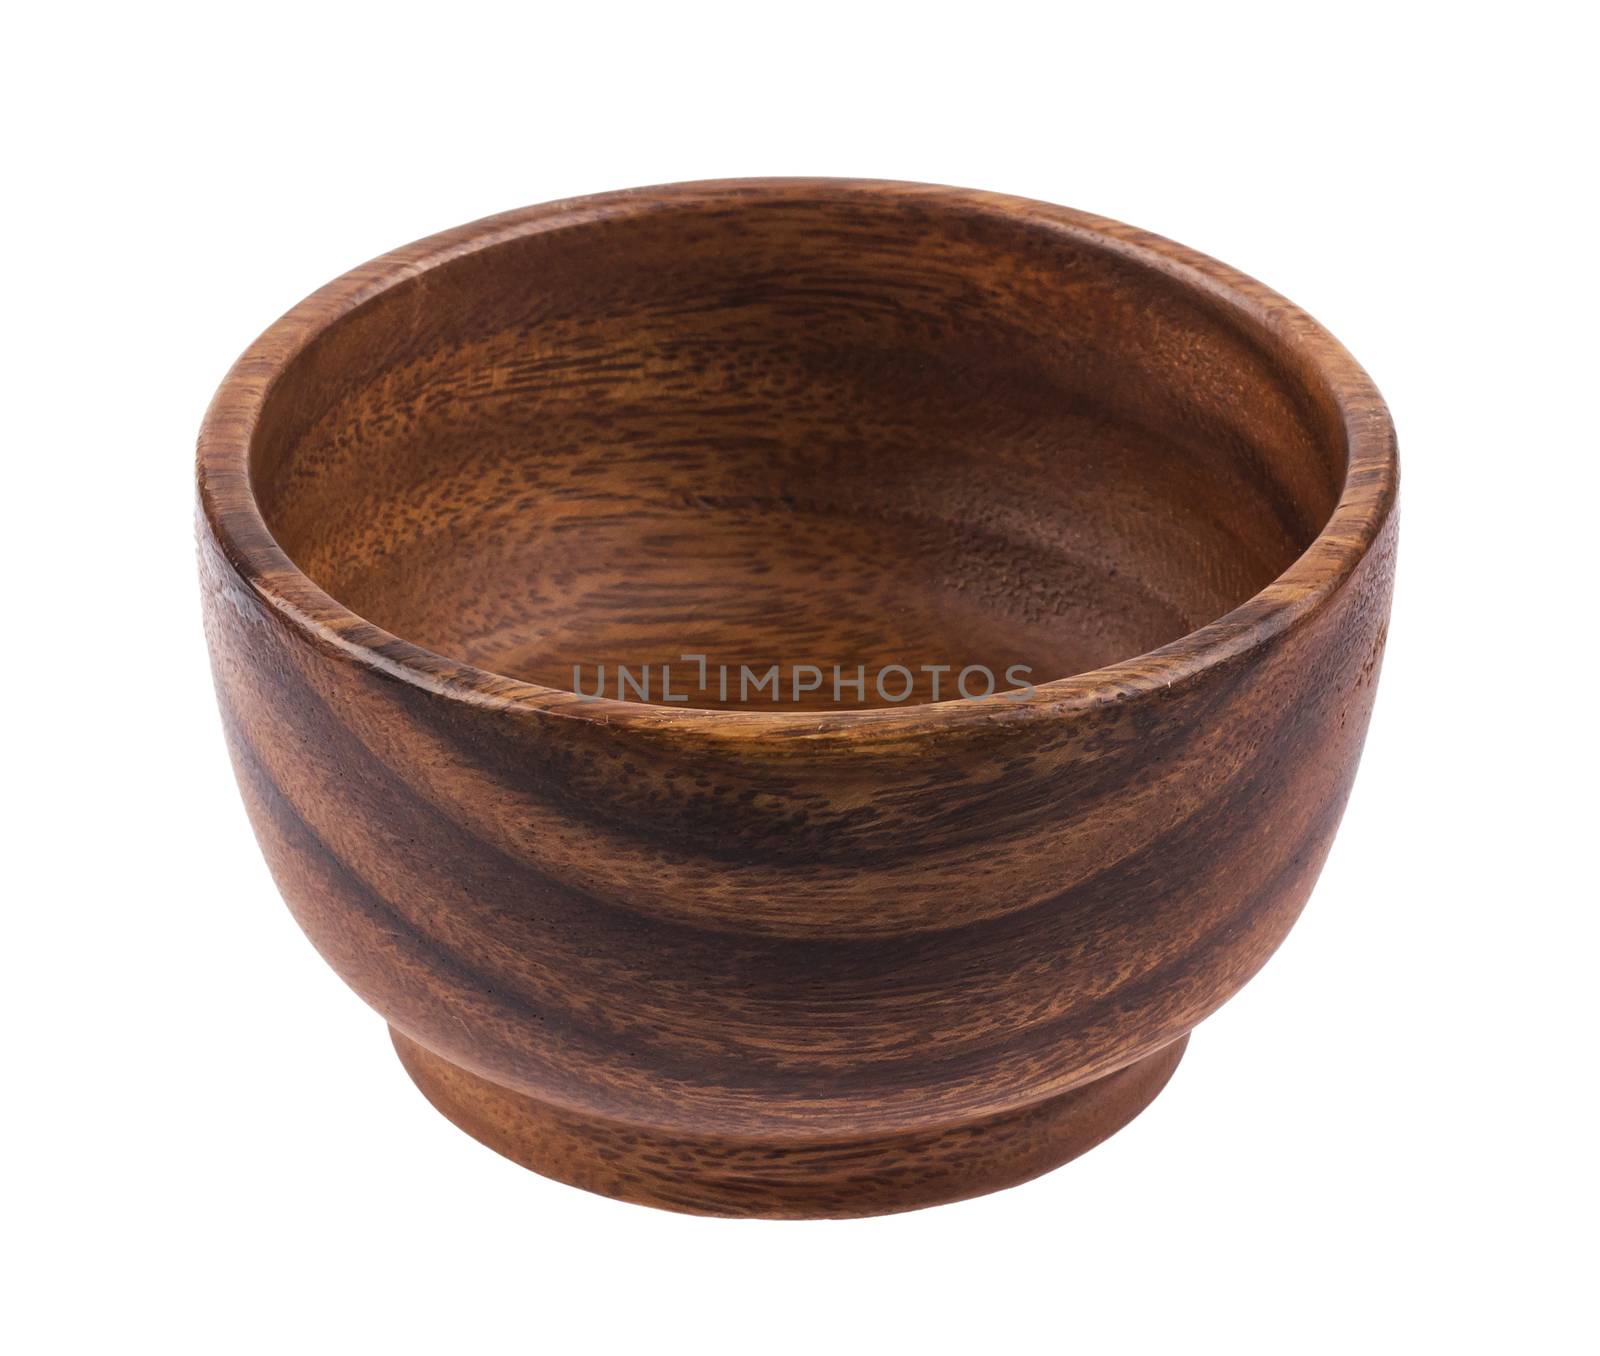 Empty wooden bowl isolated on white background with clipping path.